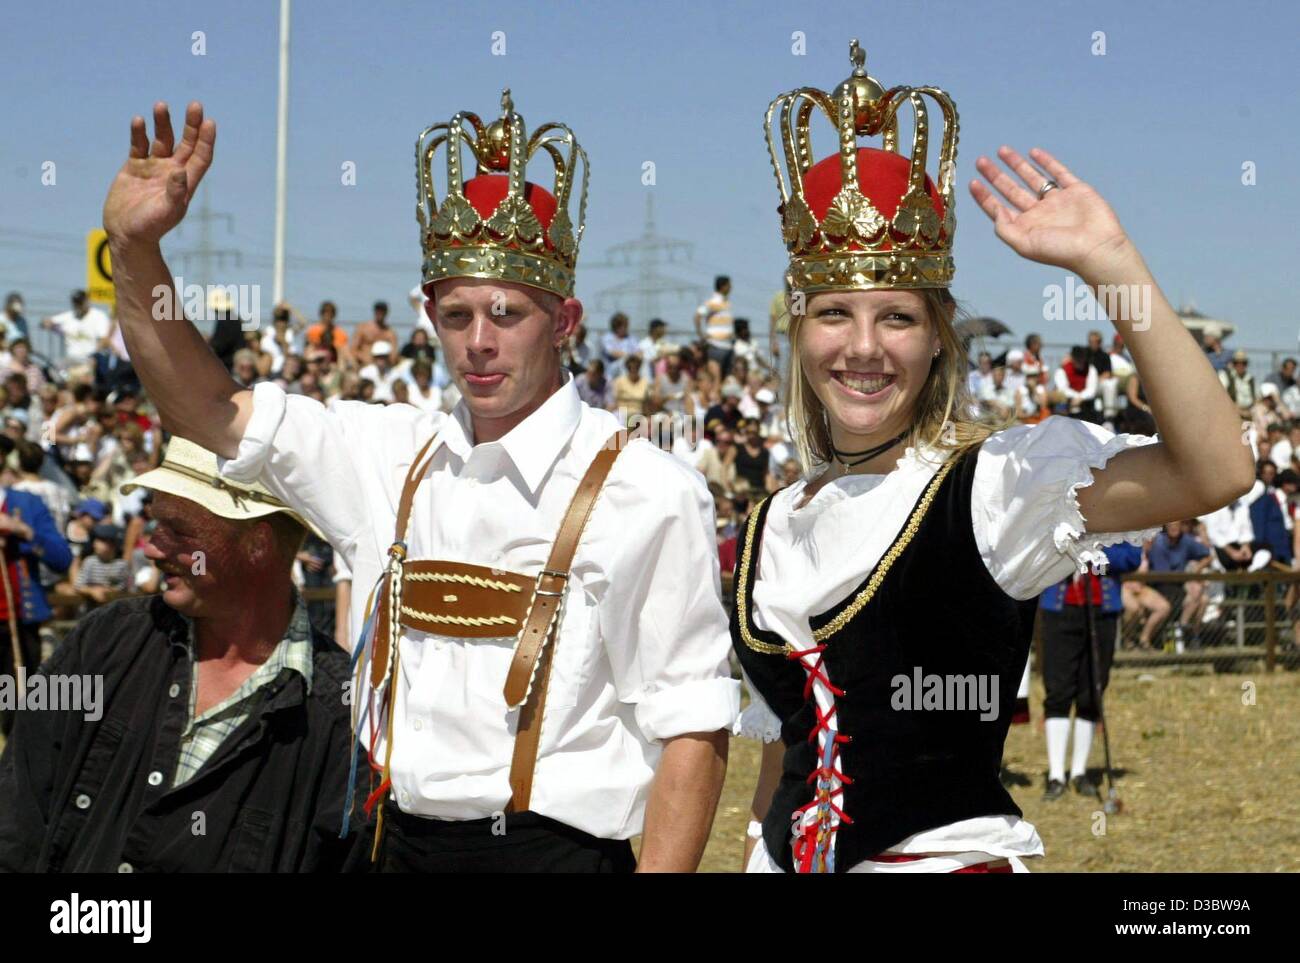 (dpa) - 15-year-old Elke Nagel and 23-year-old Stefan Giray are this year's royal couple after winning the traditional Sheperd's Run in Markgroeningen, southern Germany, 23 August 2003. They both won the race of running barefoot and in traditional costumes over a 300 feet long stubble field. The she Stock Photo